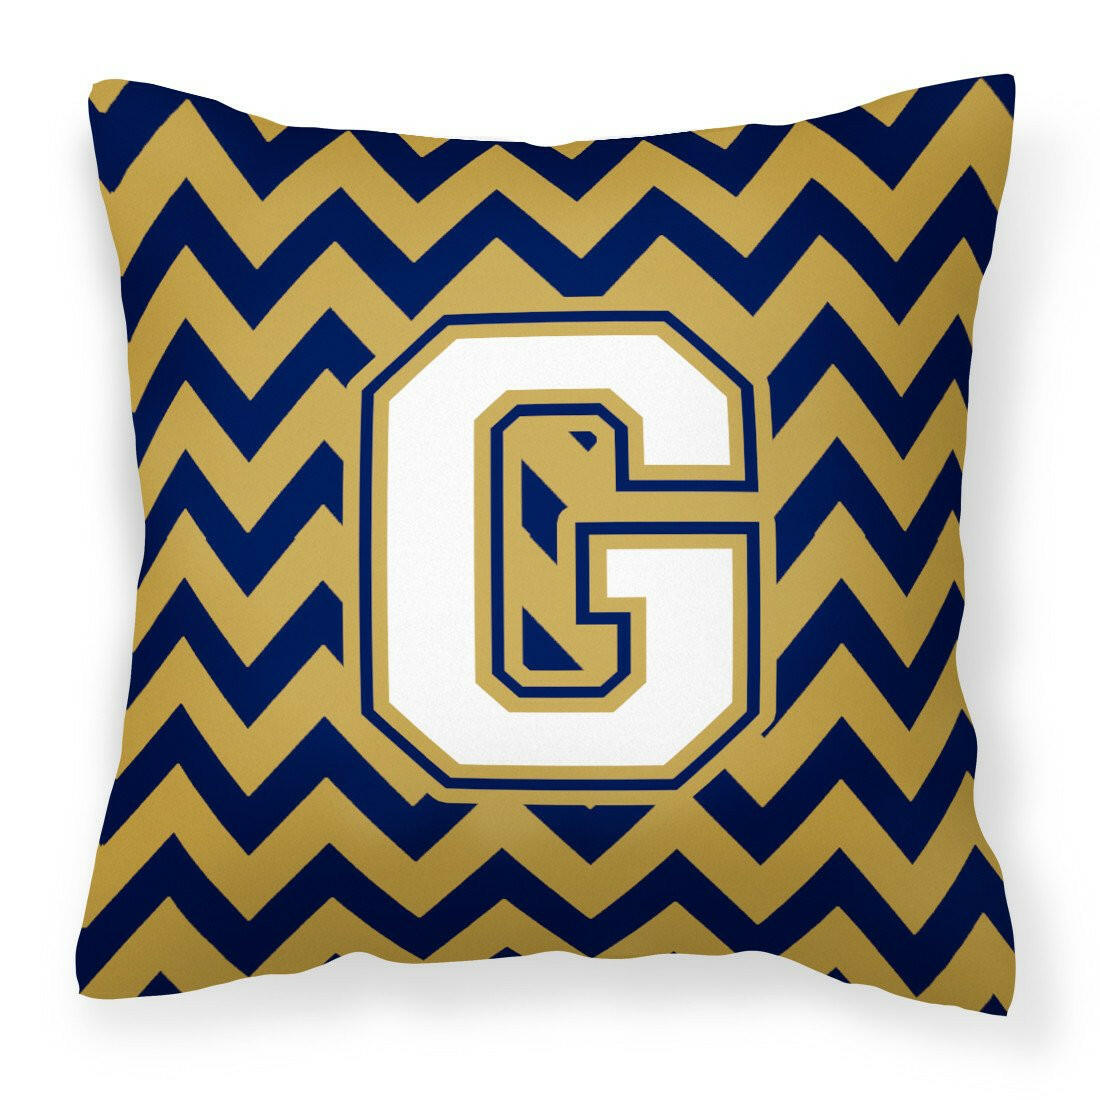 Letter G Chevron Navy Blue and Gold Fabric Decorative Pillow CJ1057-GPW1414 by Caroline's Treasures